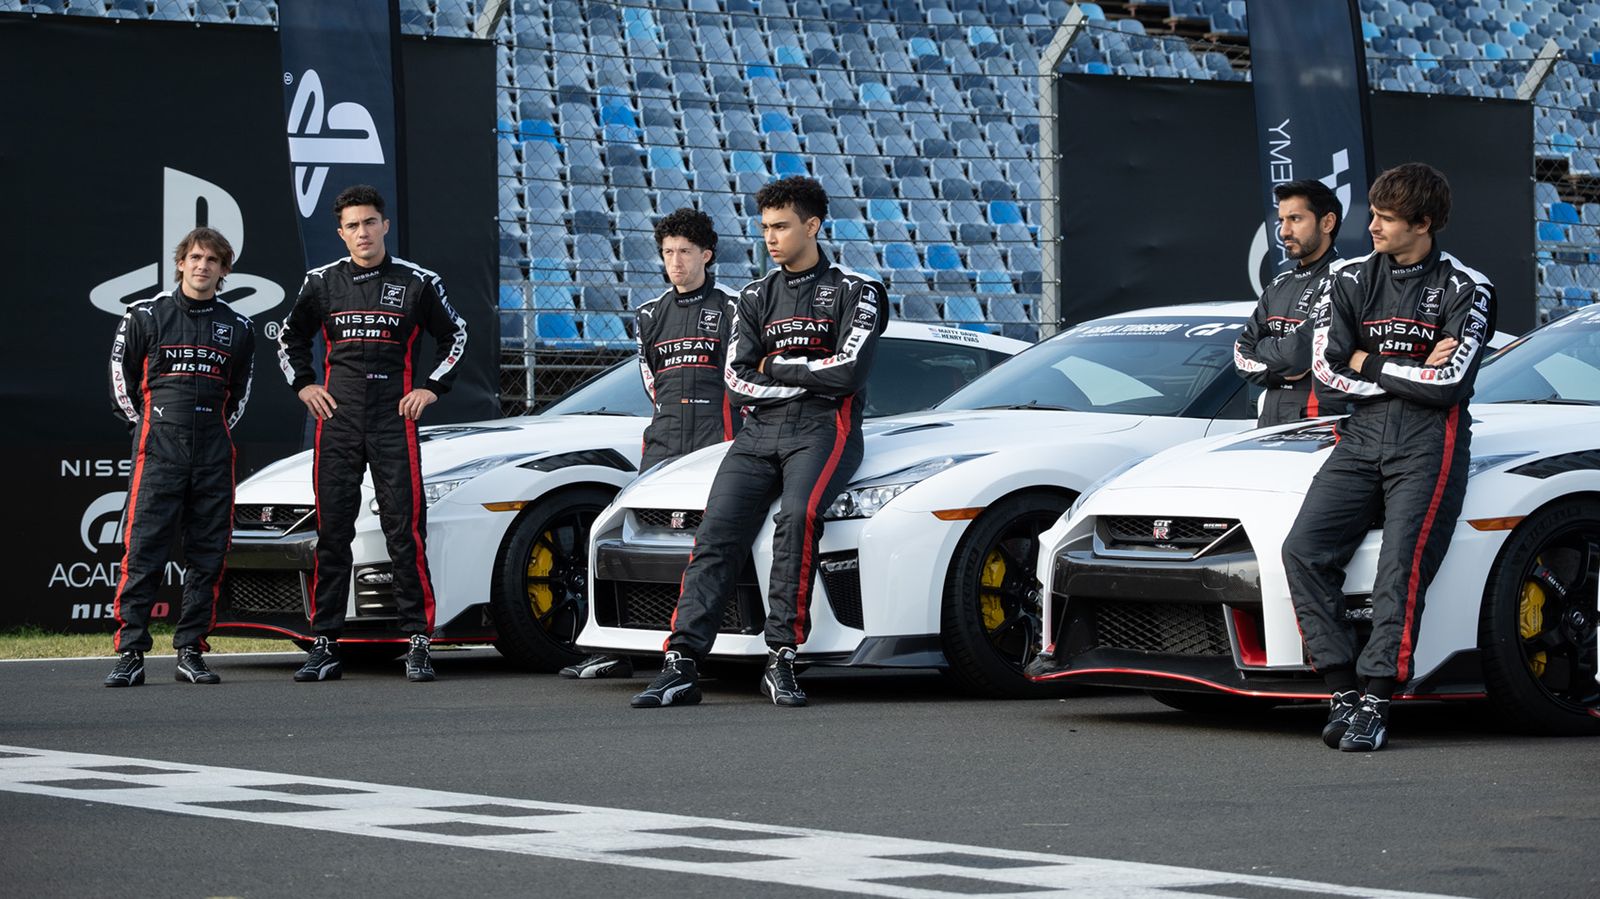 The Gran Turismo Movie is Getting Slated by Critics